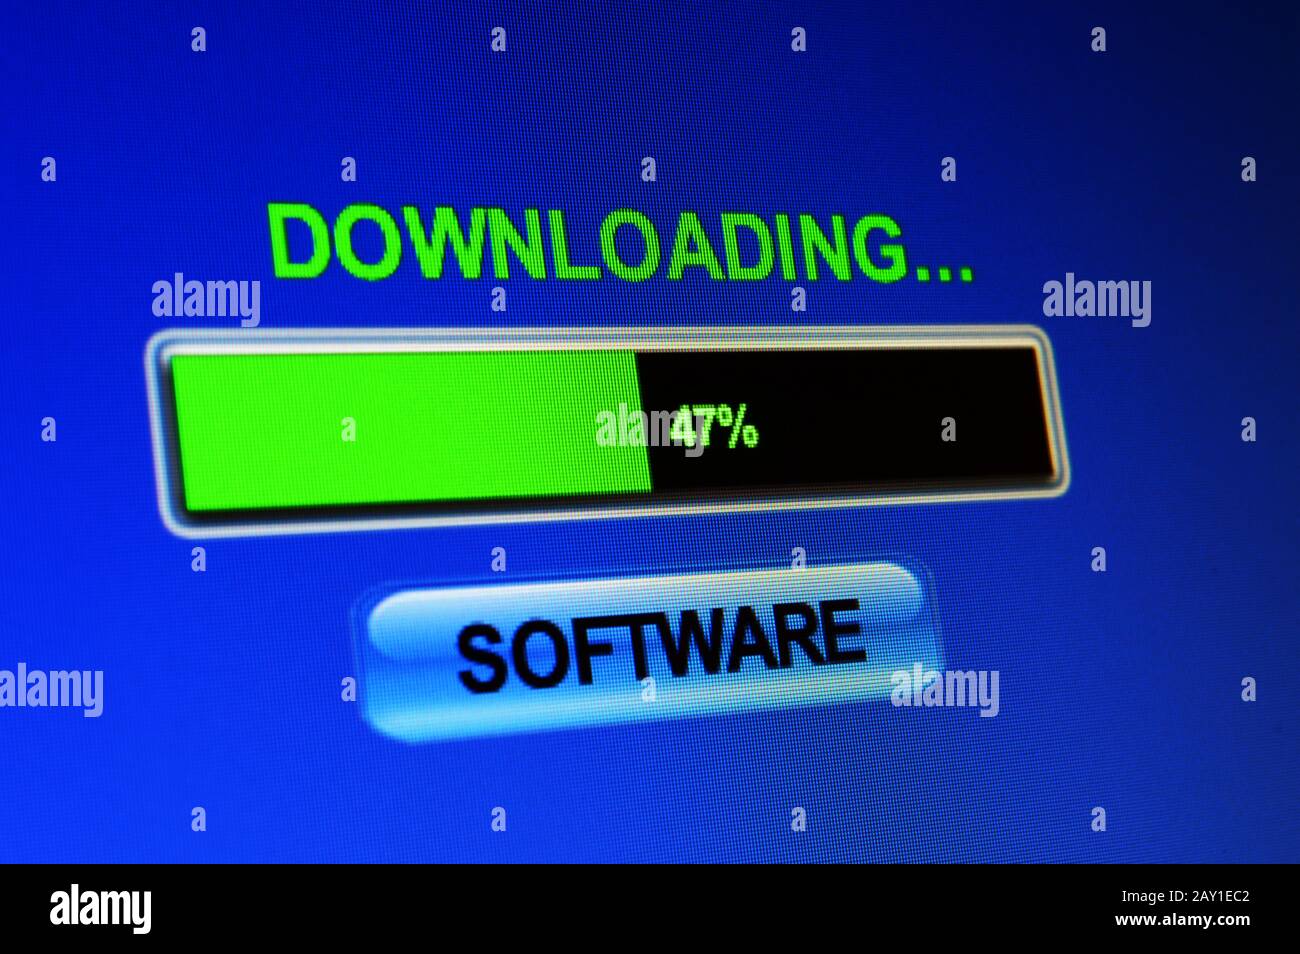 Download software Stock Photo